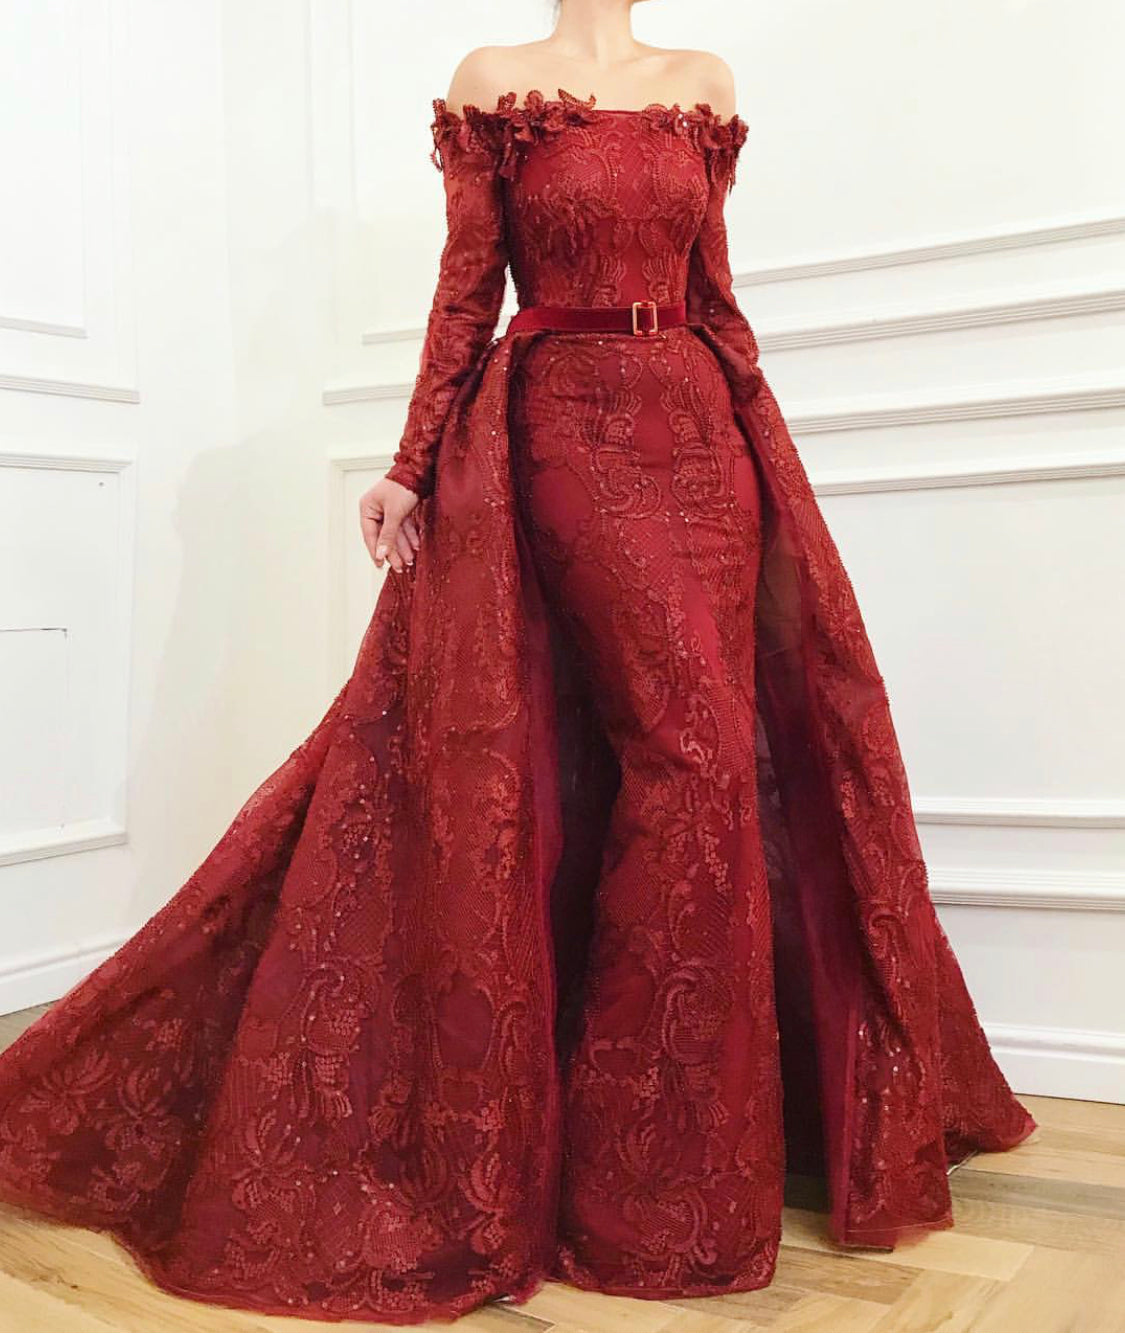 Red overskirt dress with lace, embroidery, belt and long off the shoulder sleeves